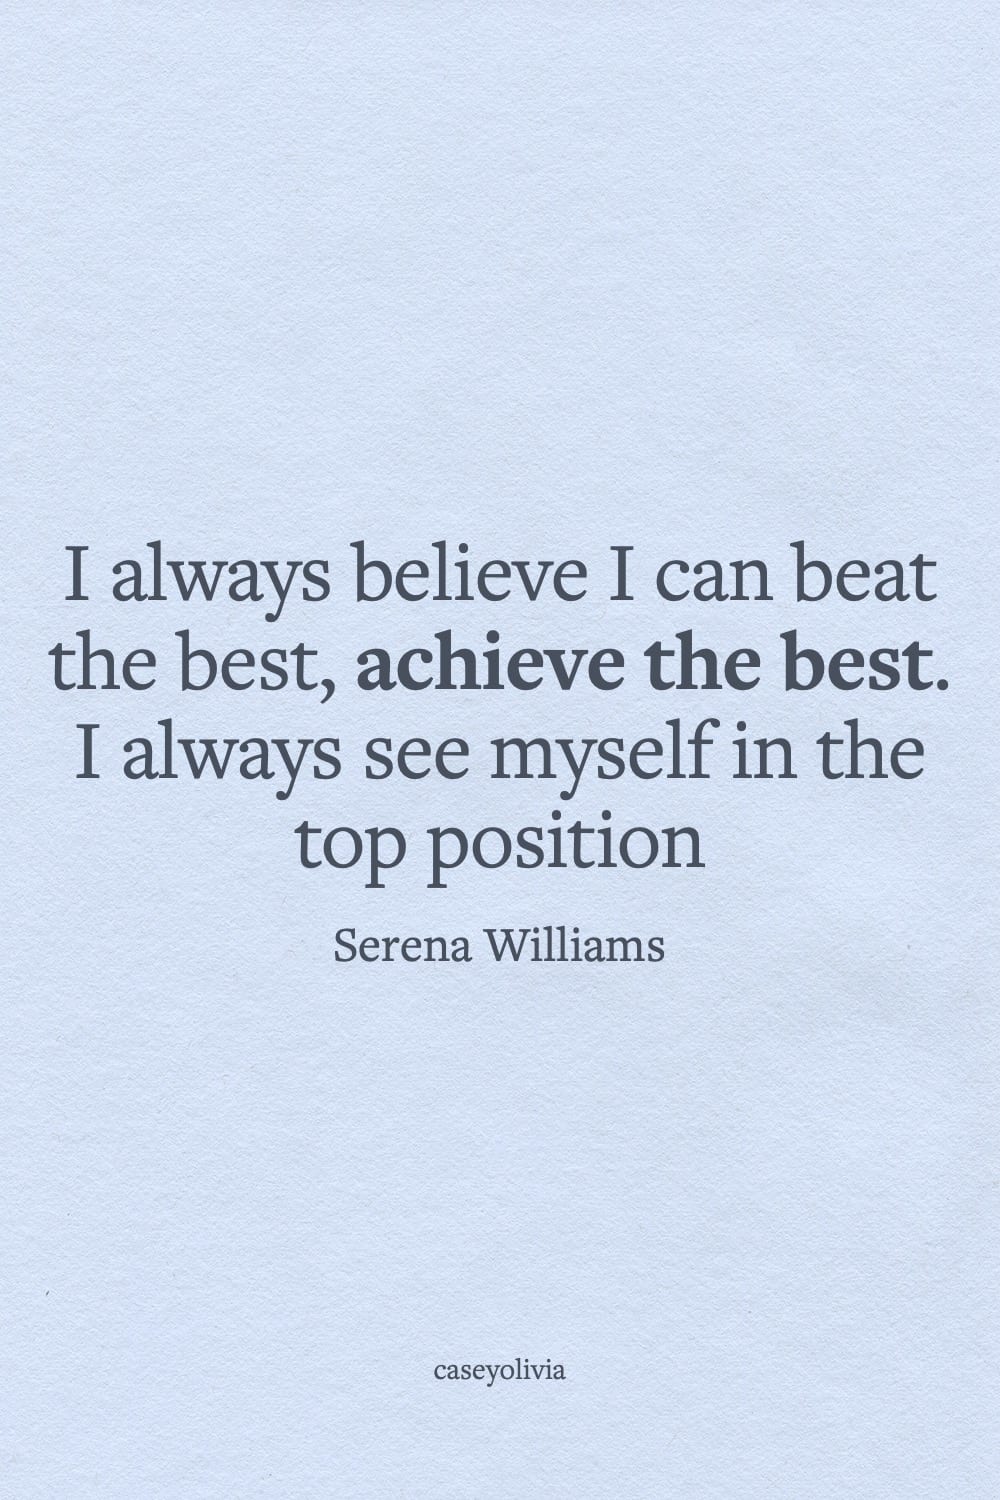 serena williams achieve the best quote for motivation